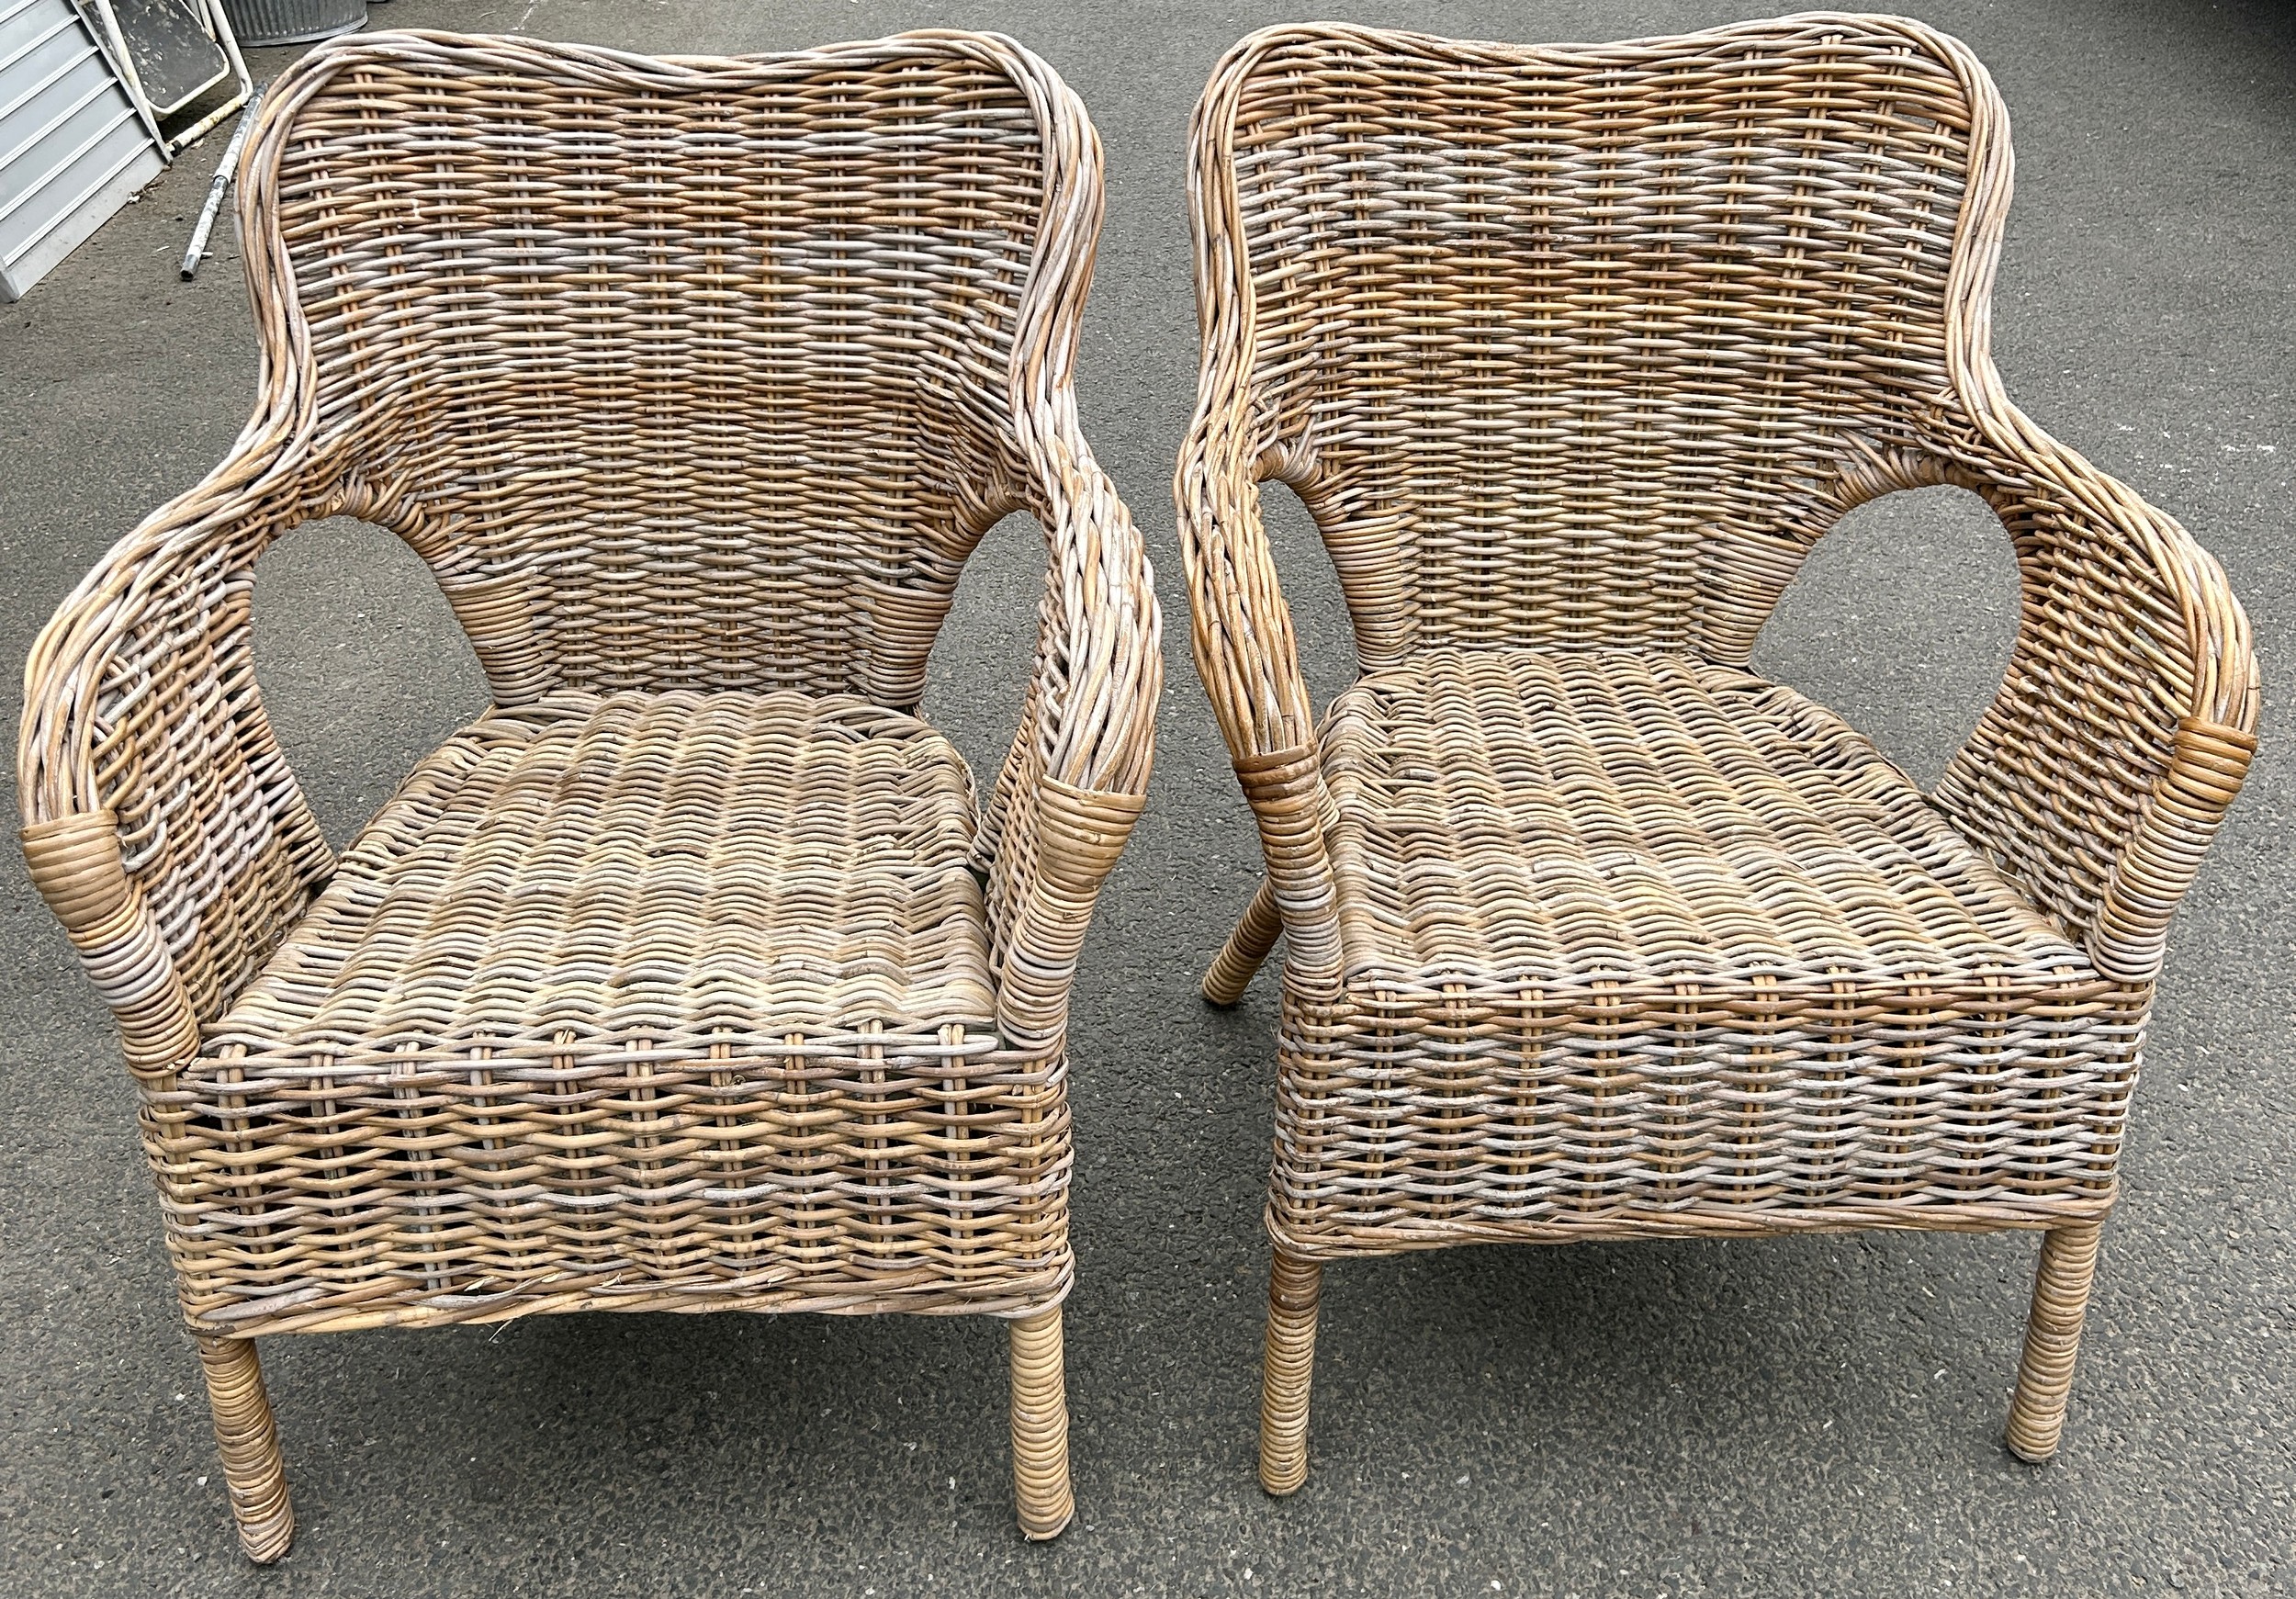 2 Wicker lounge / conservatory chairs, overall height 36 inches